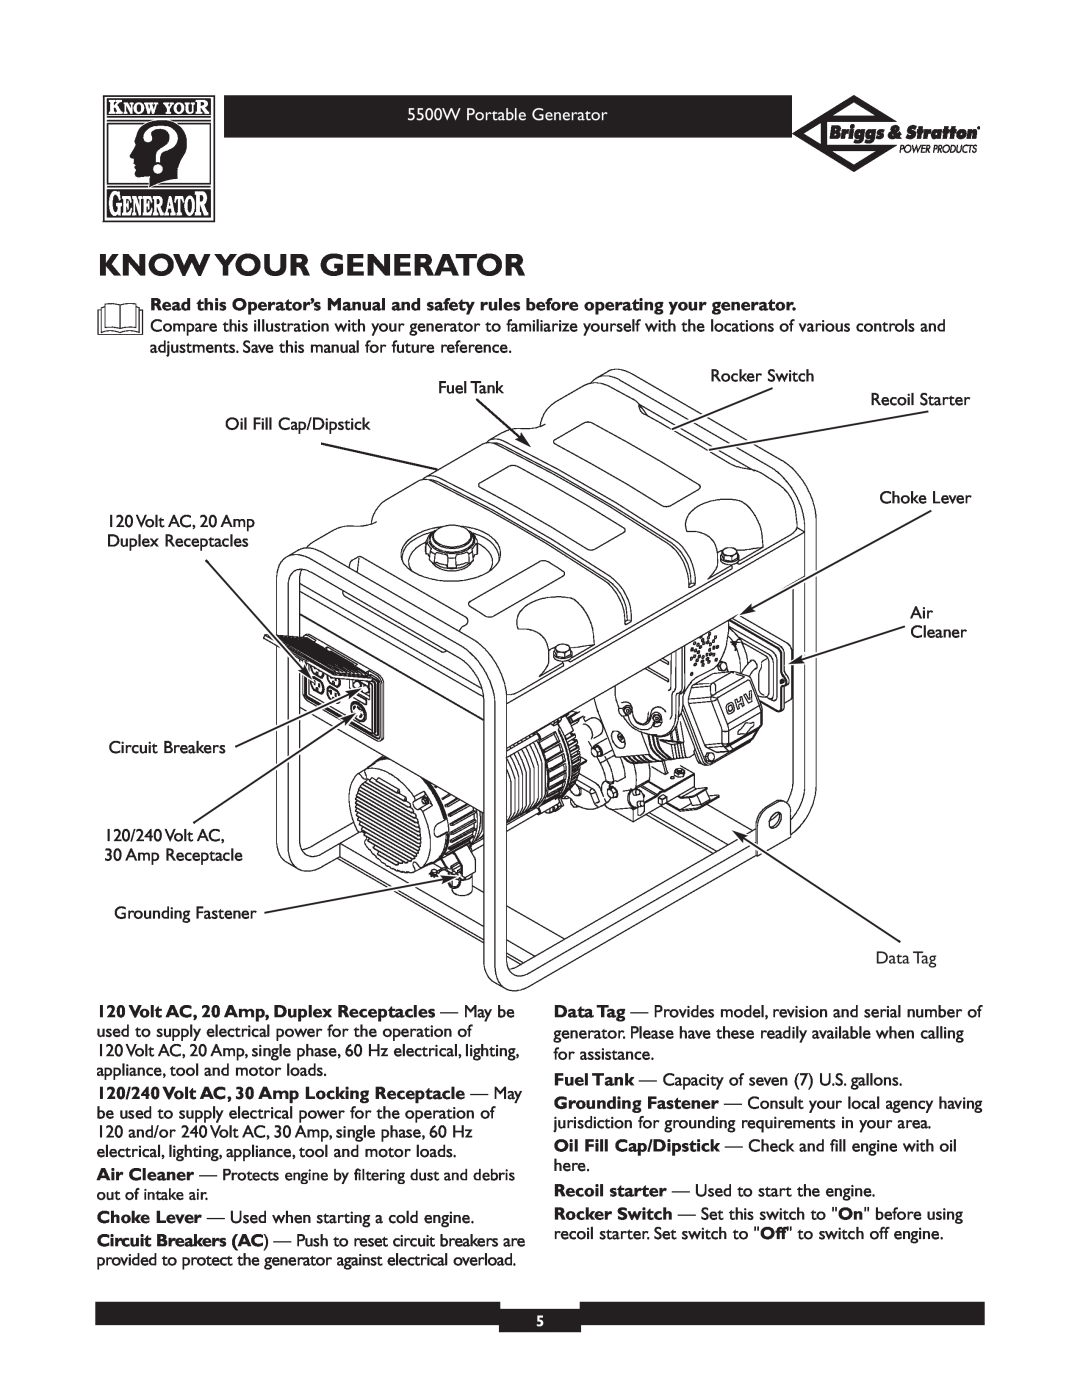 Briggs & Stratton 030209-1 operating instructions Know Your Generator 